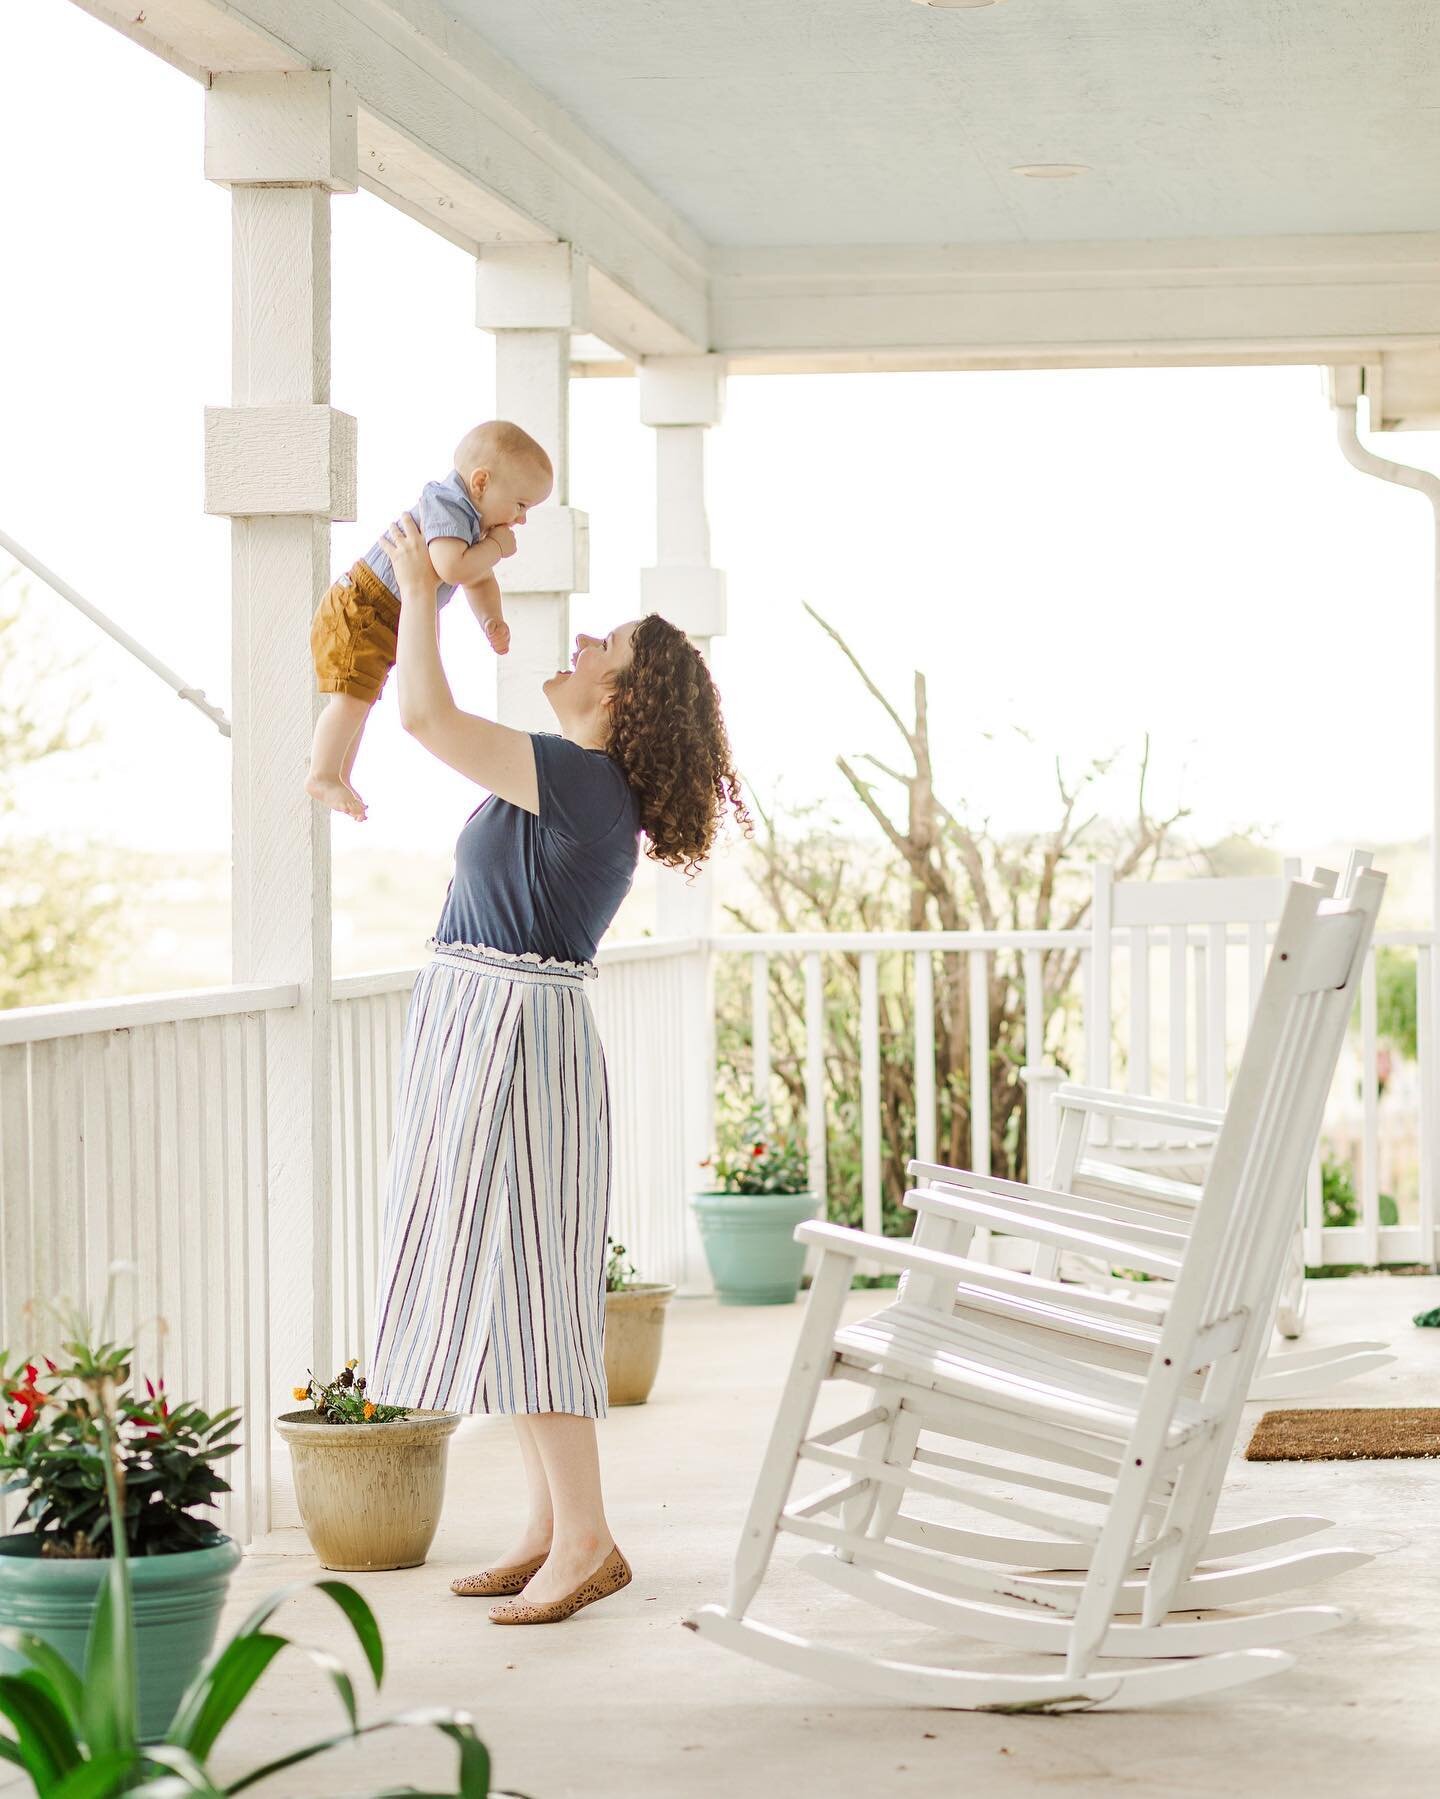 There are few things sweeter in life than relaxing on a front porch in a rocking chair, except maybe sitting on a beach with a margarita in hand. 😅

#frontporch #familyphotographer #atxphotographer #boldemotionalcolorful #meetthemoment 

#mommyandba